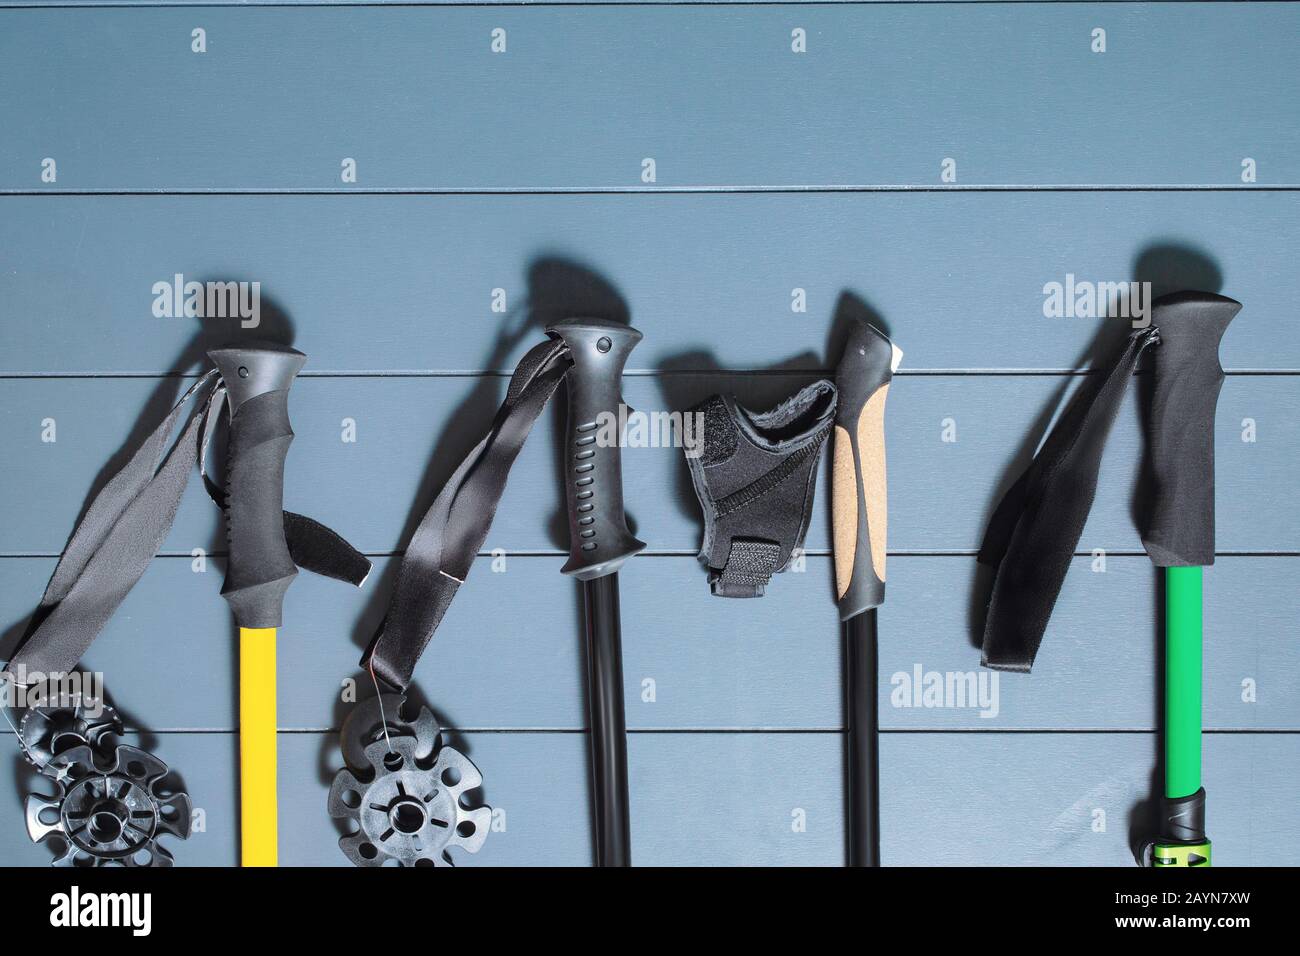 Flat lay top view of set of many hiking or ski poles on a wooden background Stock Photo